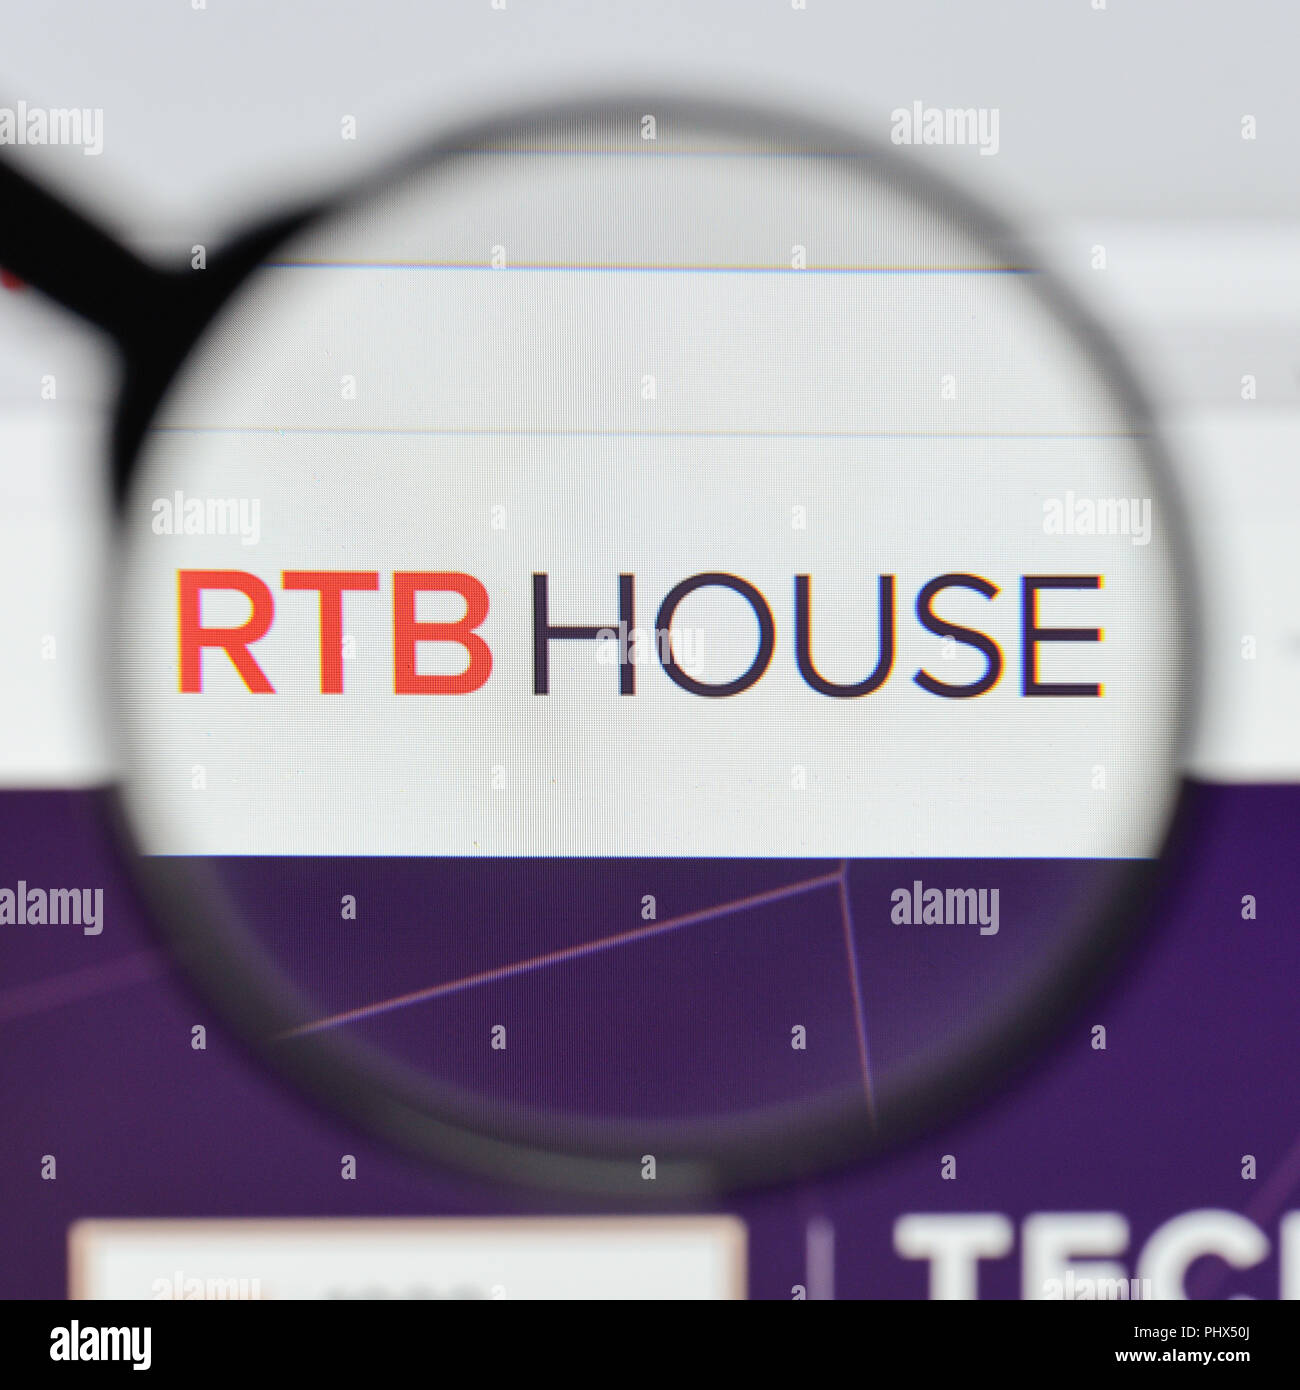 Milan, Italy - August 20, 2018: RTB House website homepage. RTB House logo visible. Stock Photo